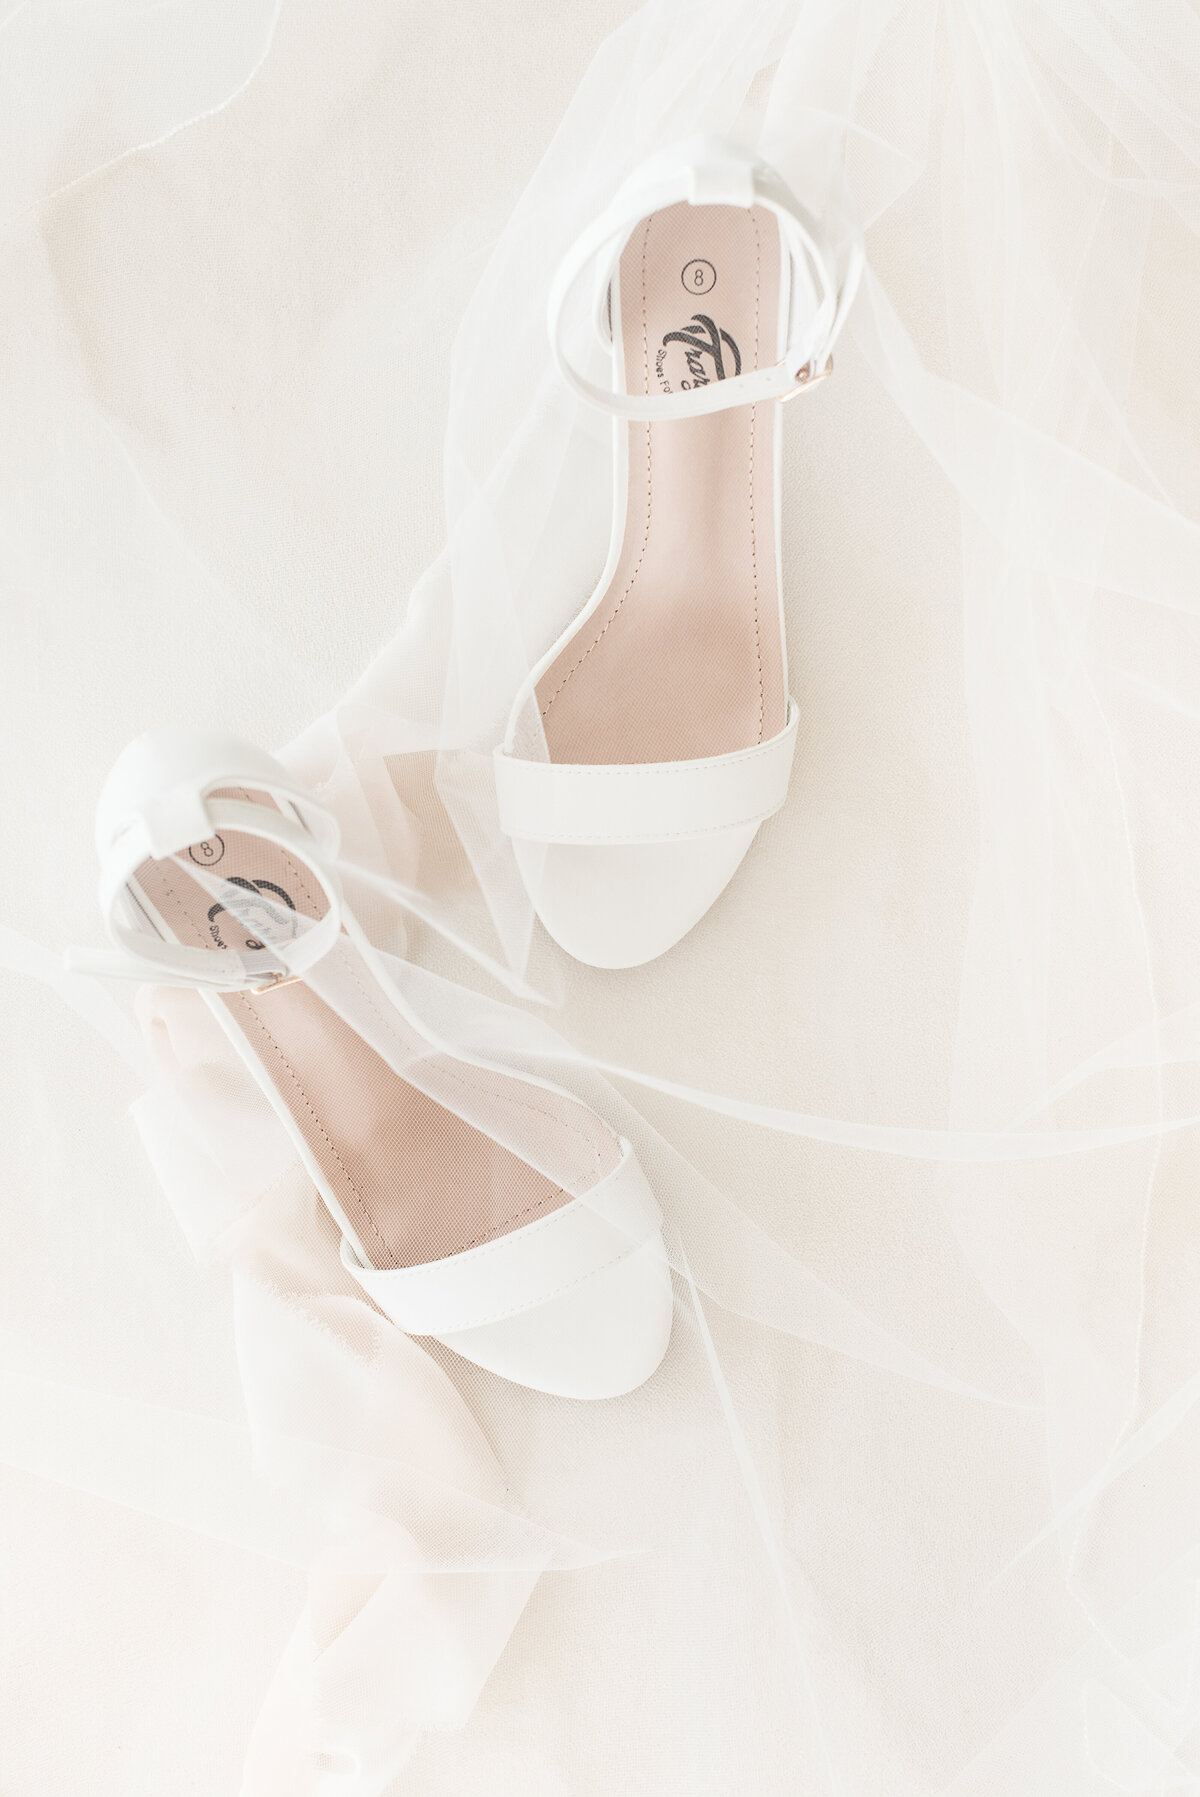 white wedding shoes and veil